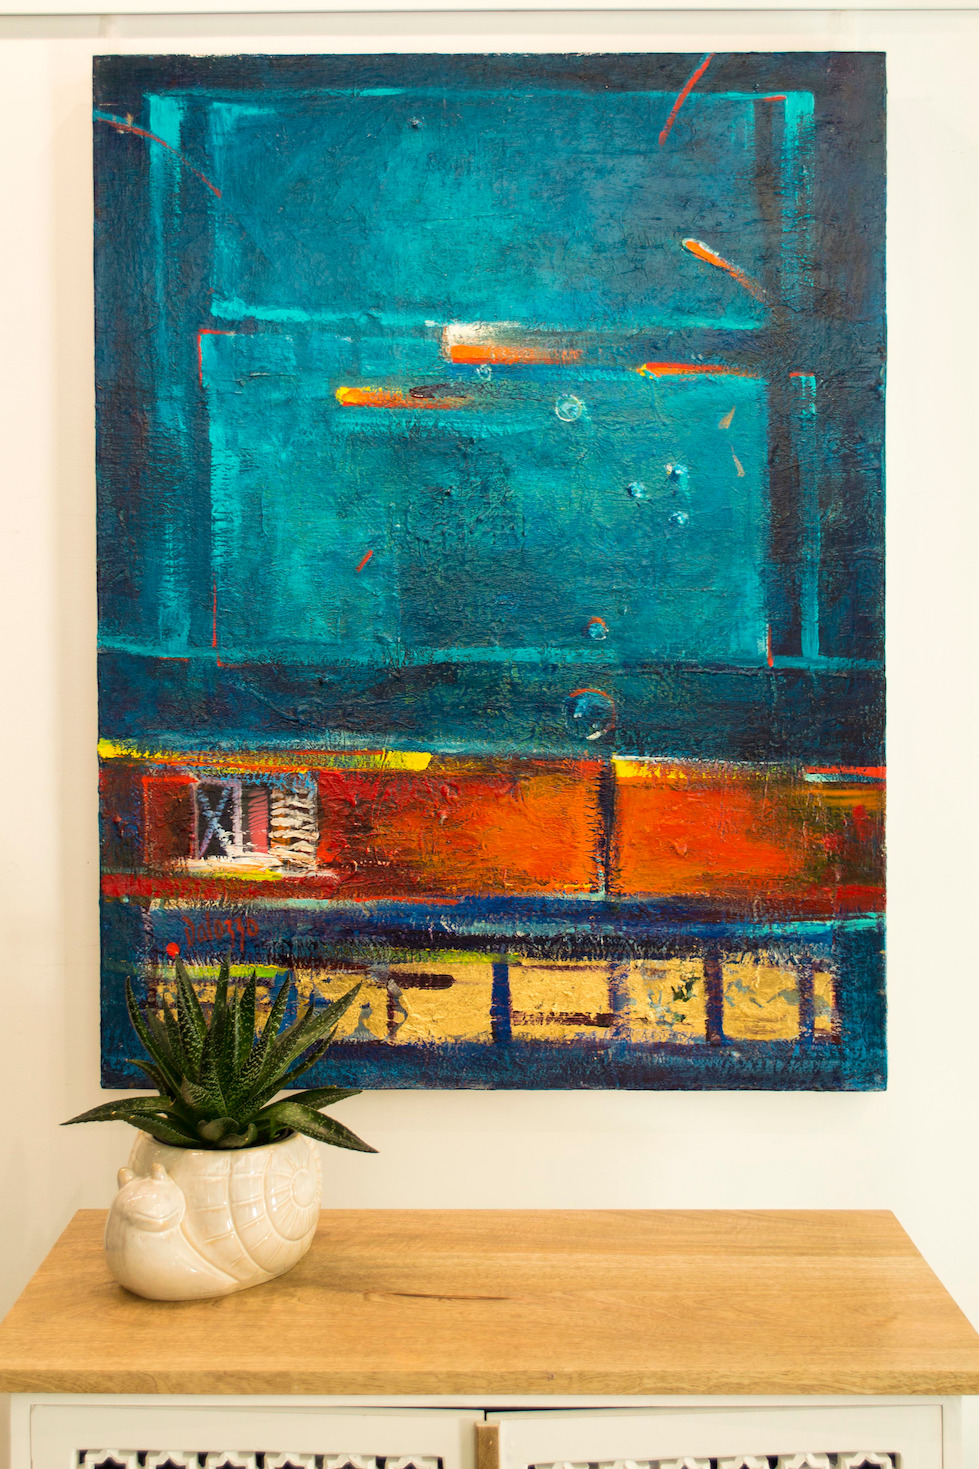 Wall Design Ideas 1 With Abstract Painting "Turquoise Aqua" By Lucette Dalozzo